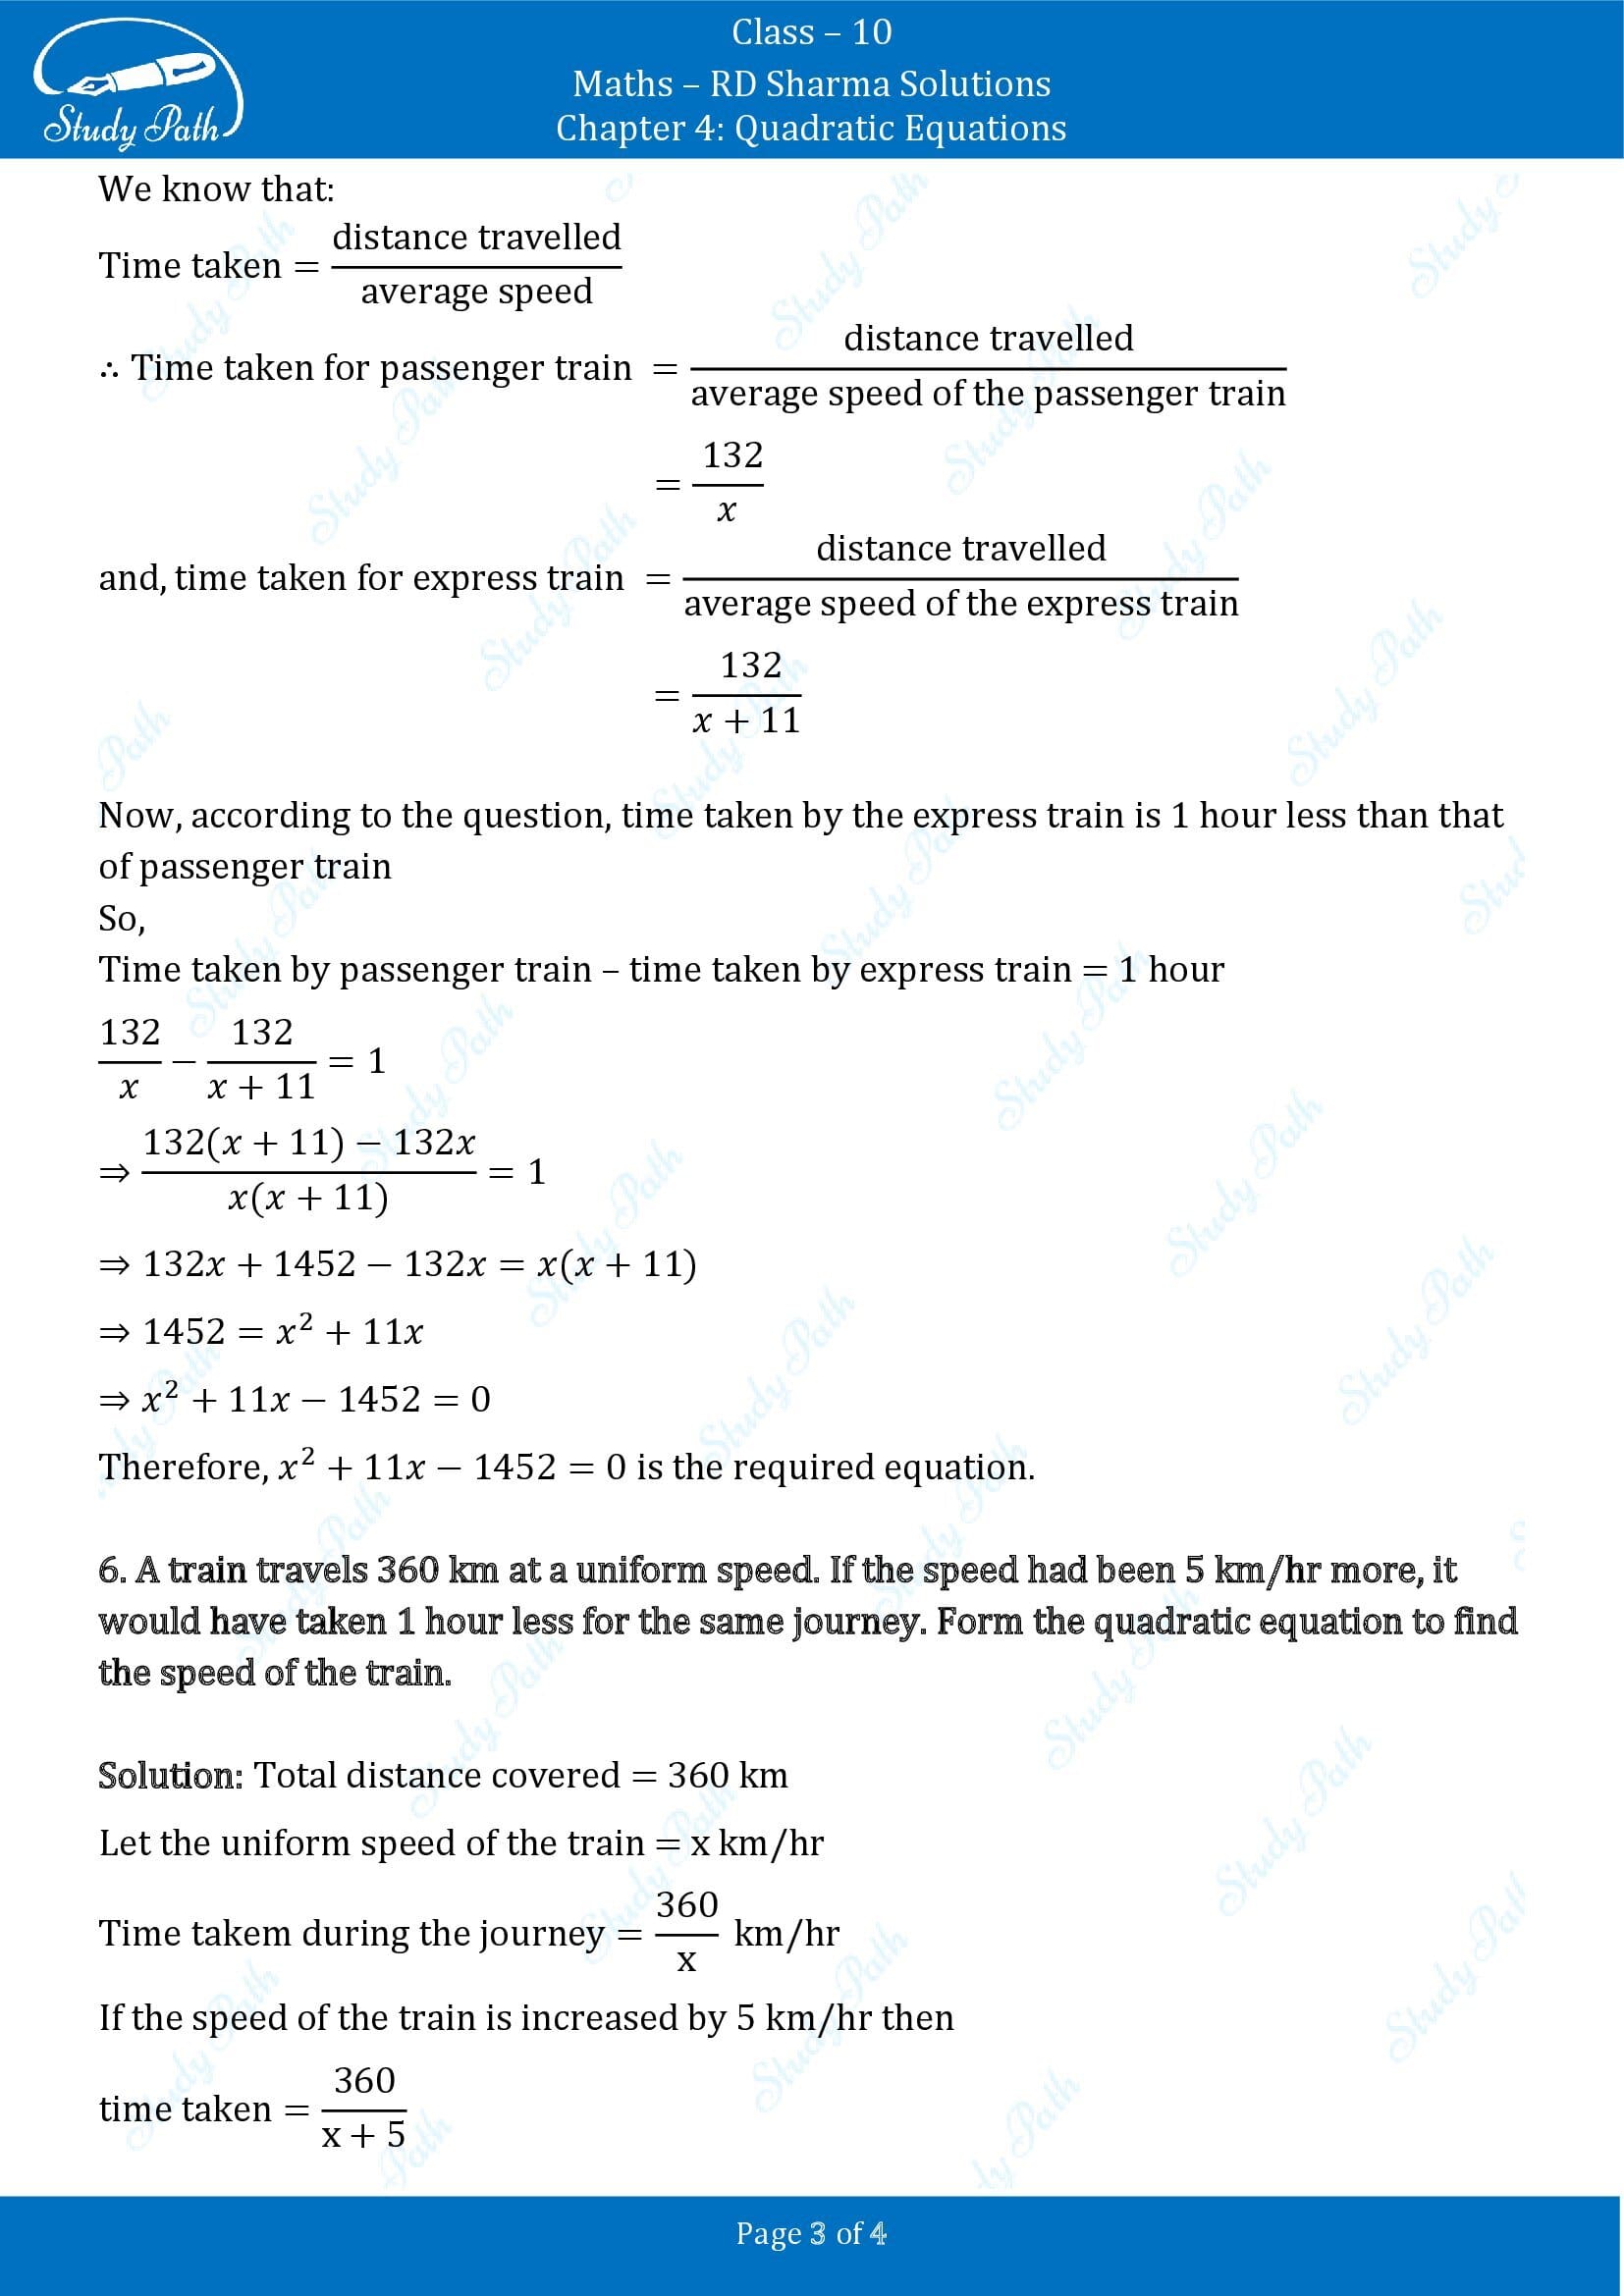 RD Sharma Solutions Class 10 Chapter 4 Quadratic Equations Exercise 4.2 0003